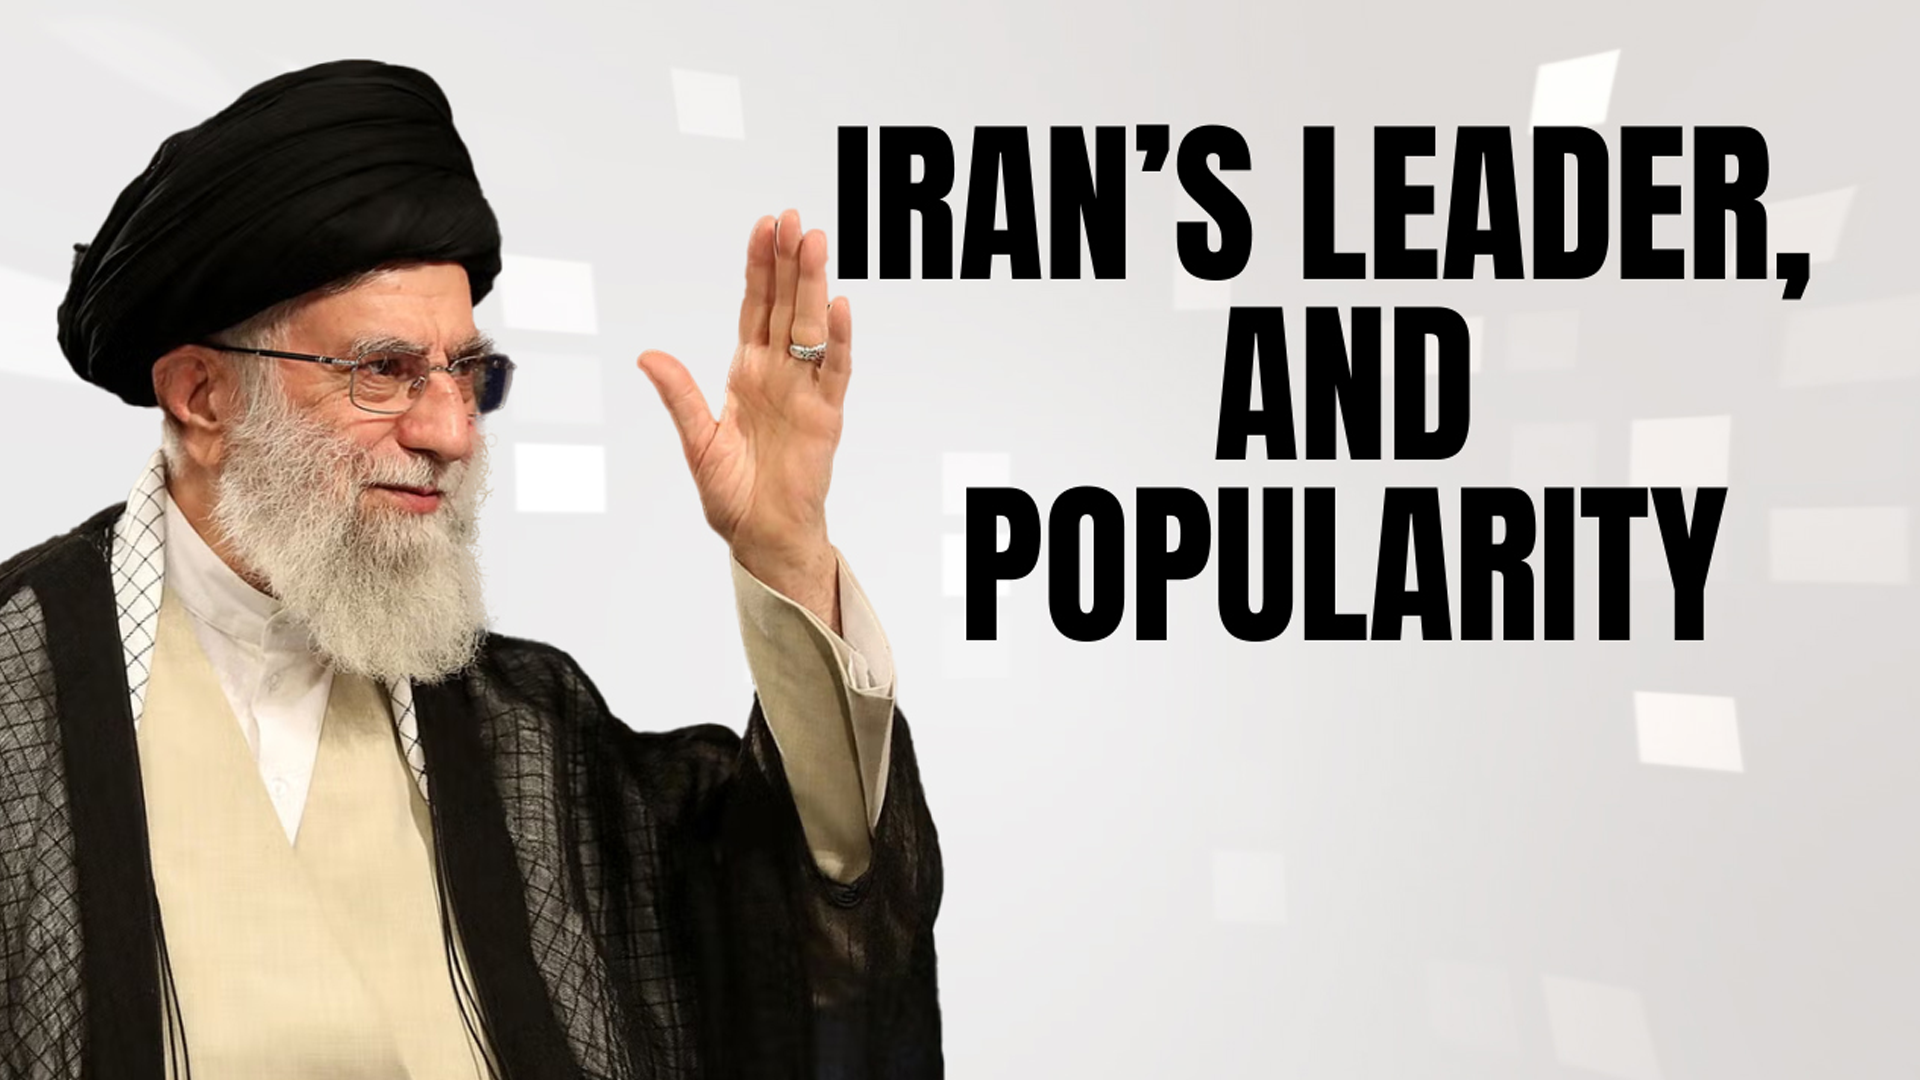 Iran's Leader and popularity 